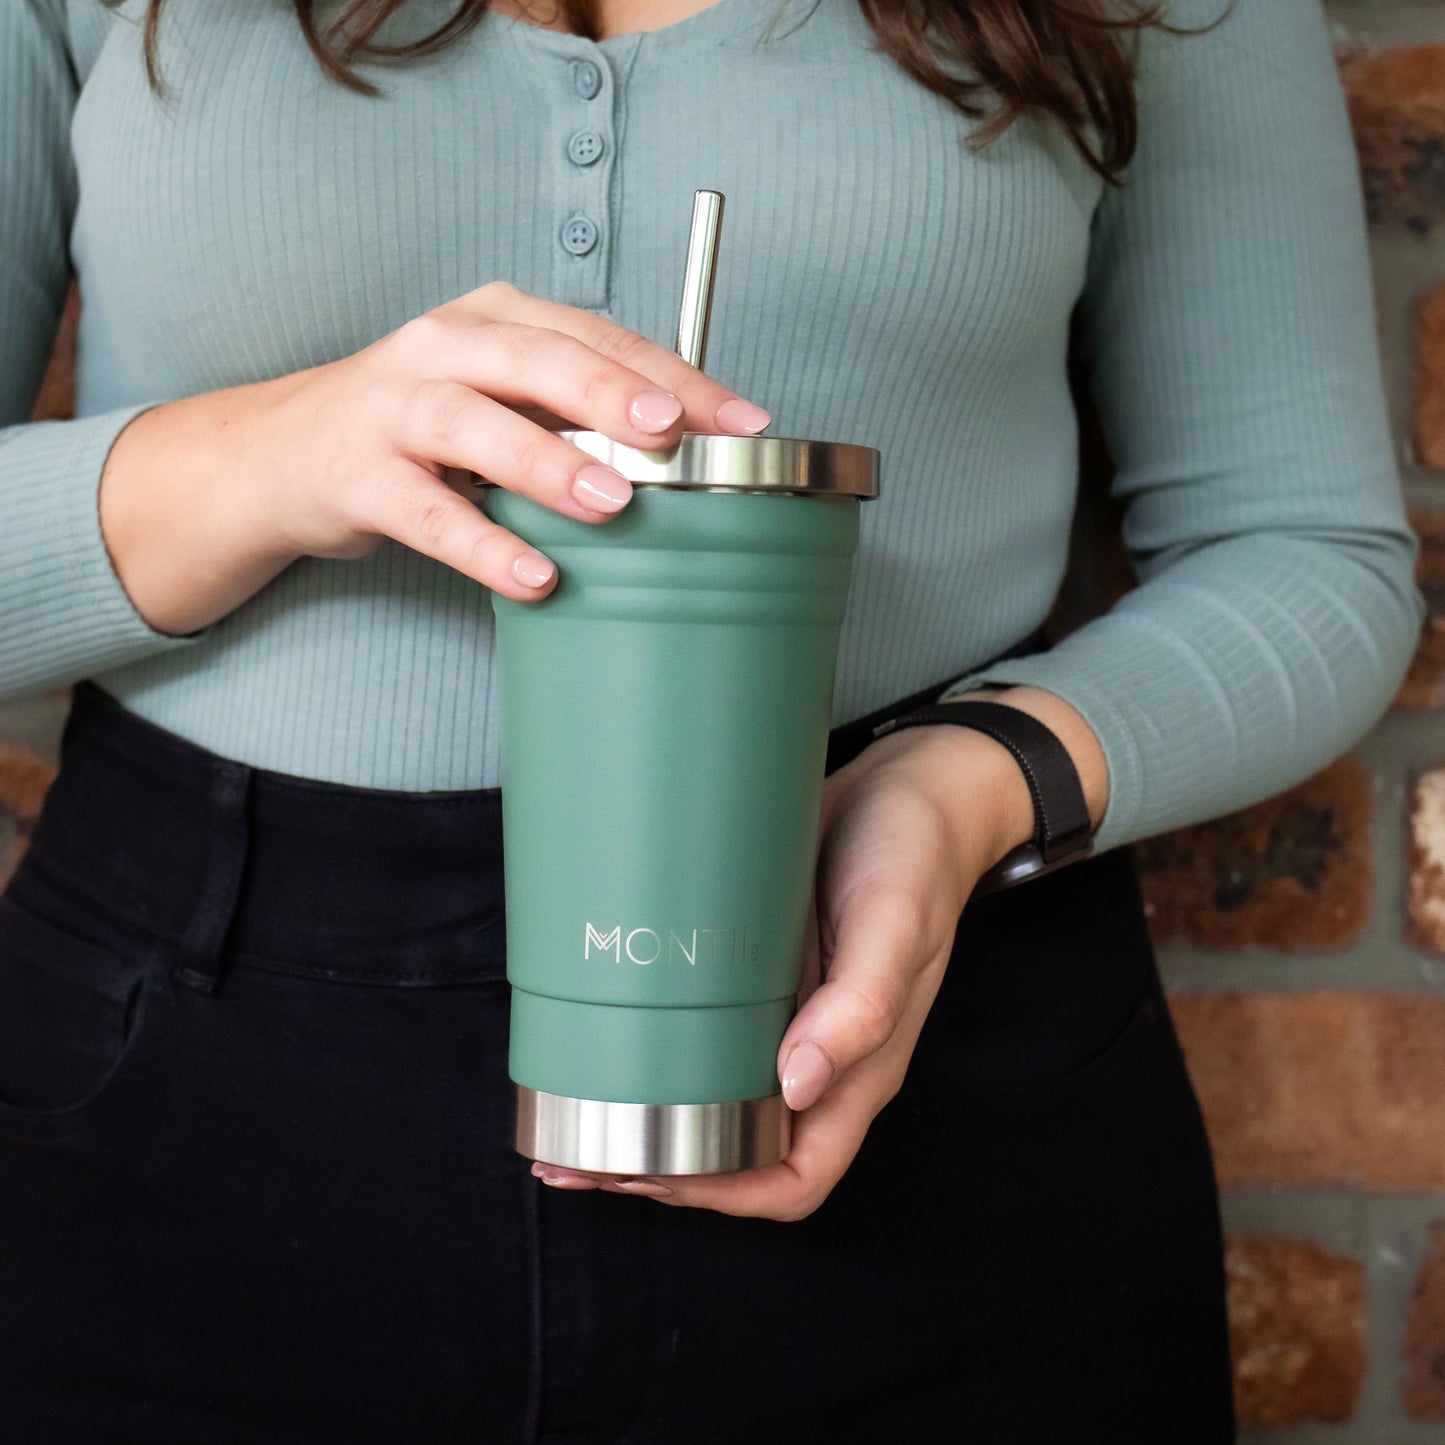 MontiiCo Stainless Steel Smoothie Cup - Sage